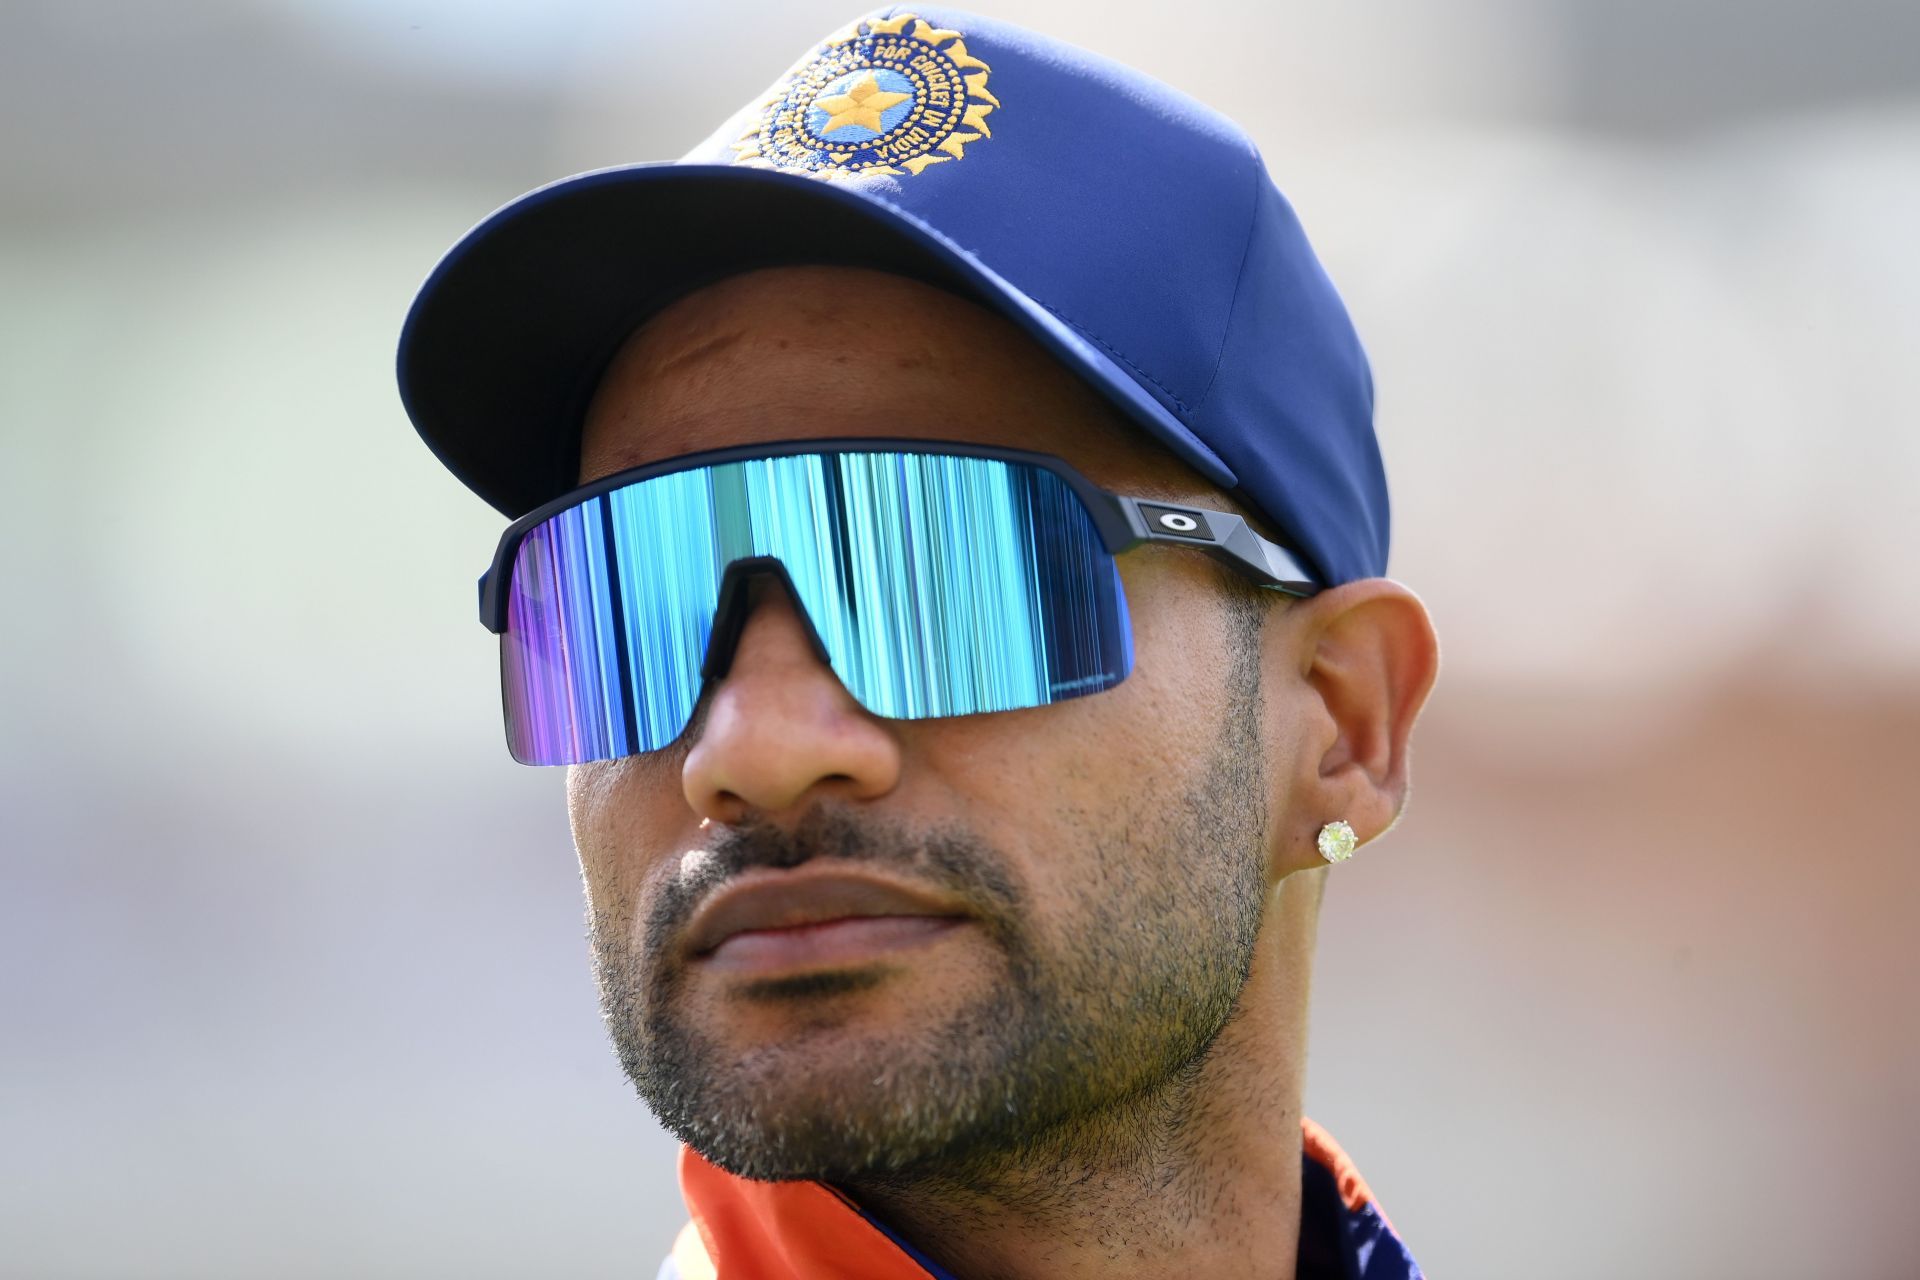 Shikhar Dhawan did not have a great time in the ODI series against England